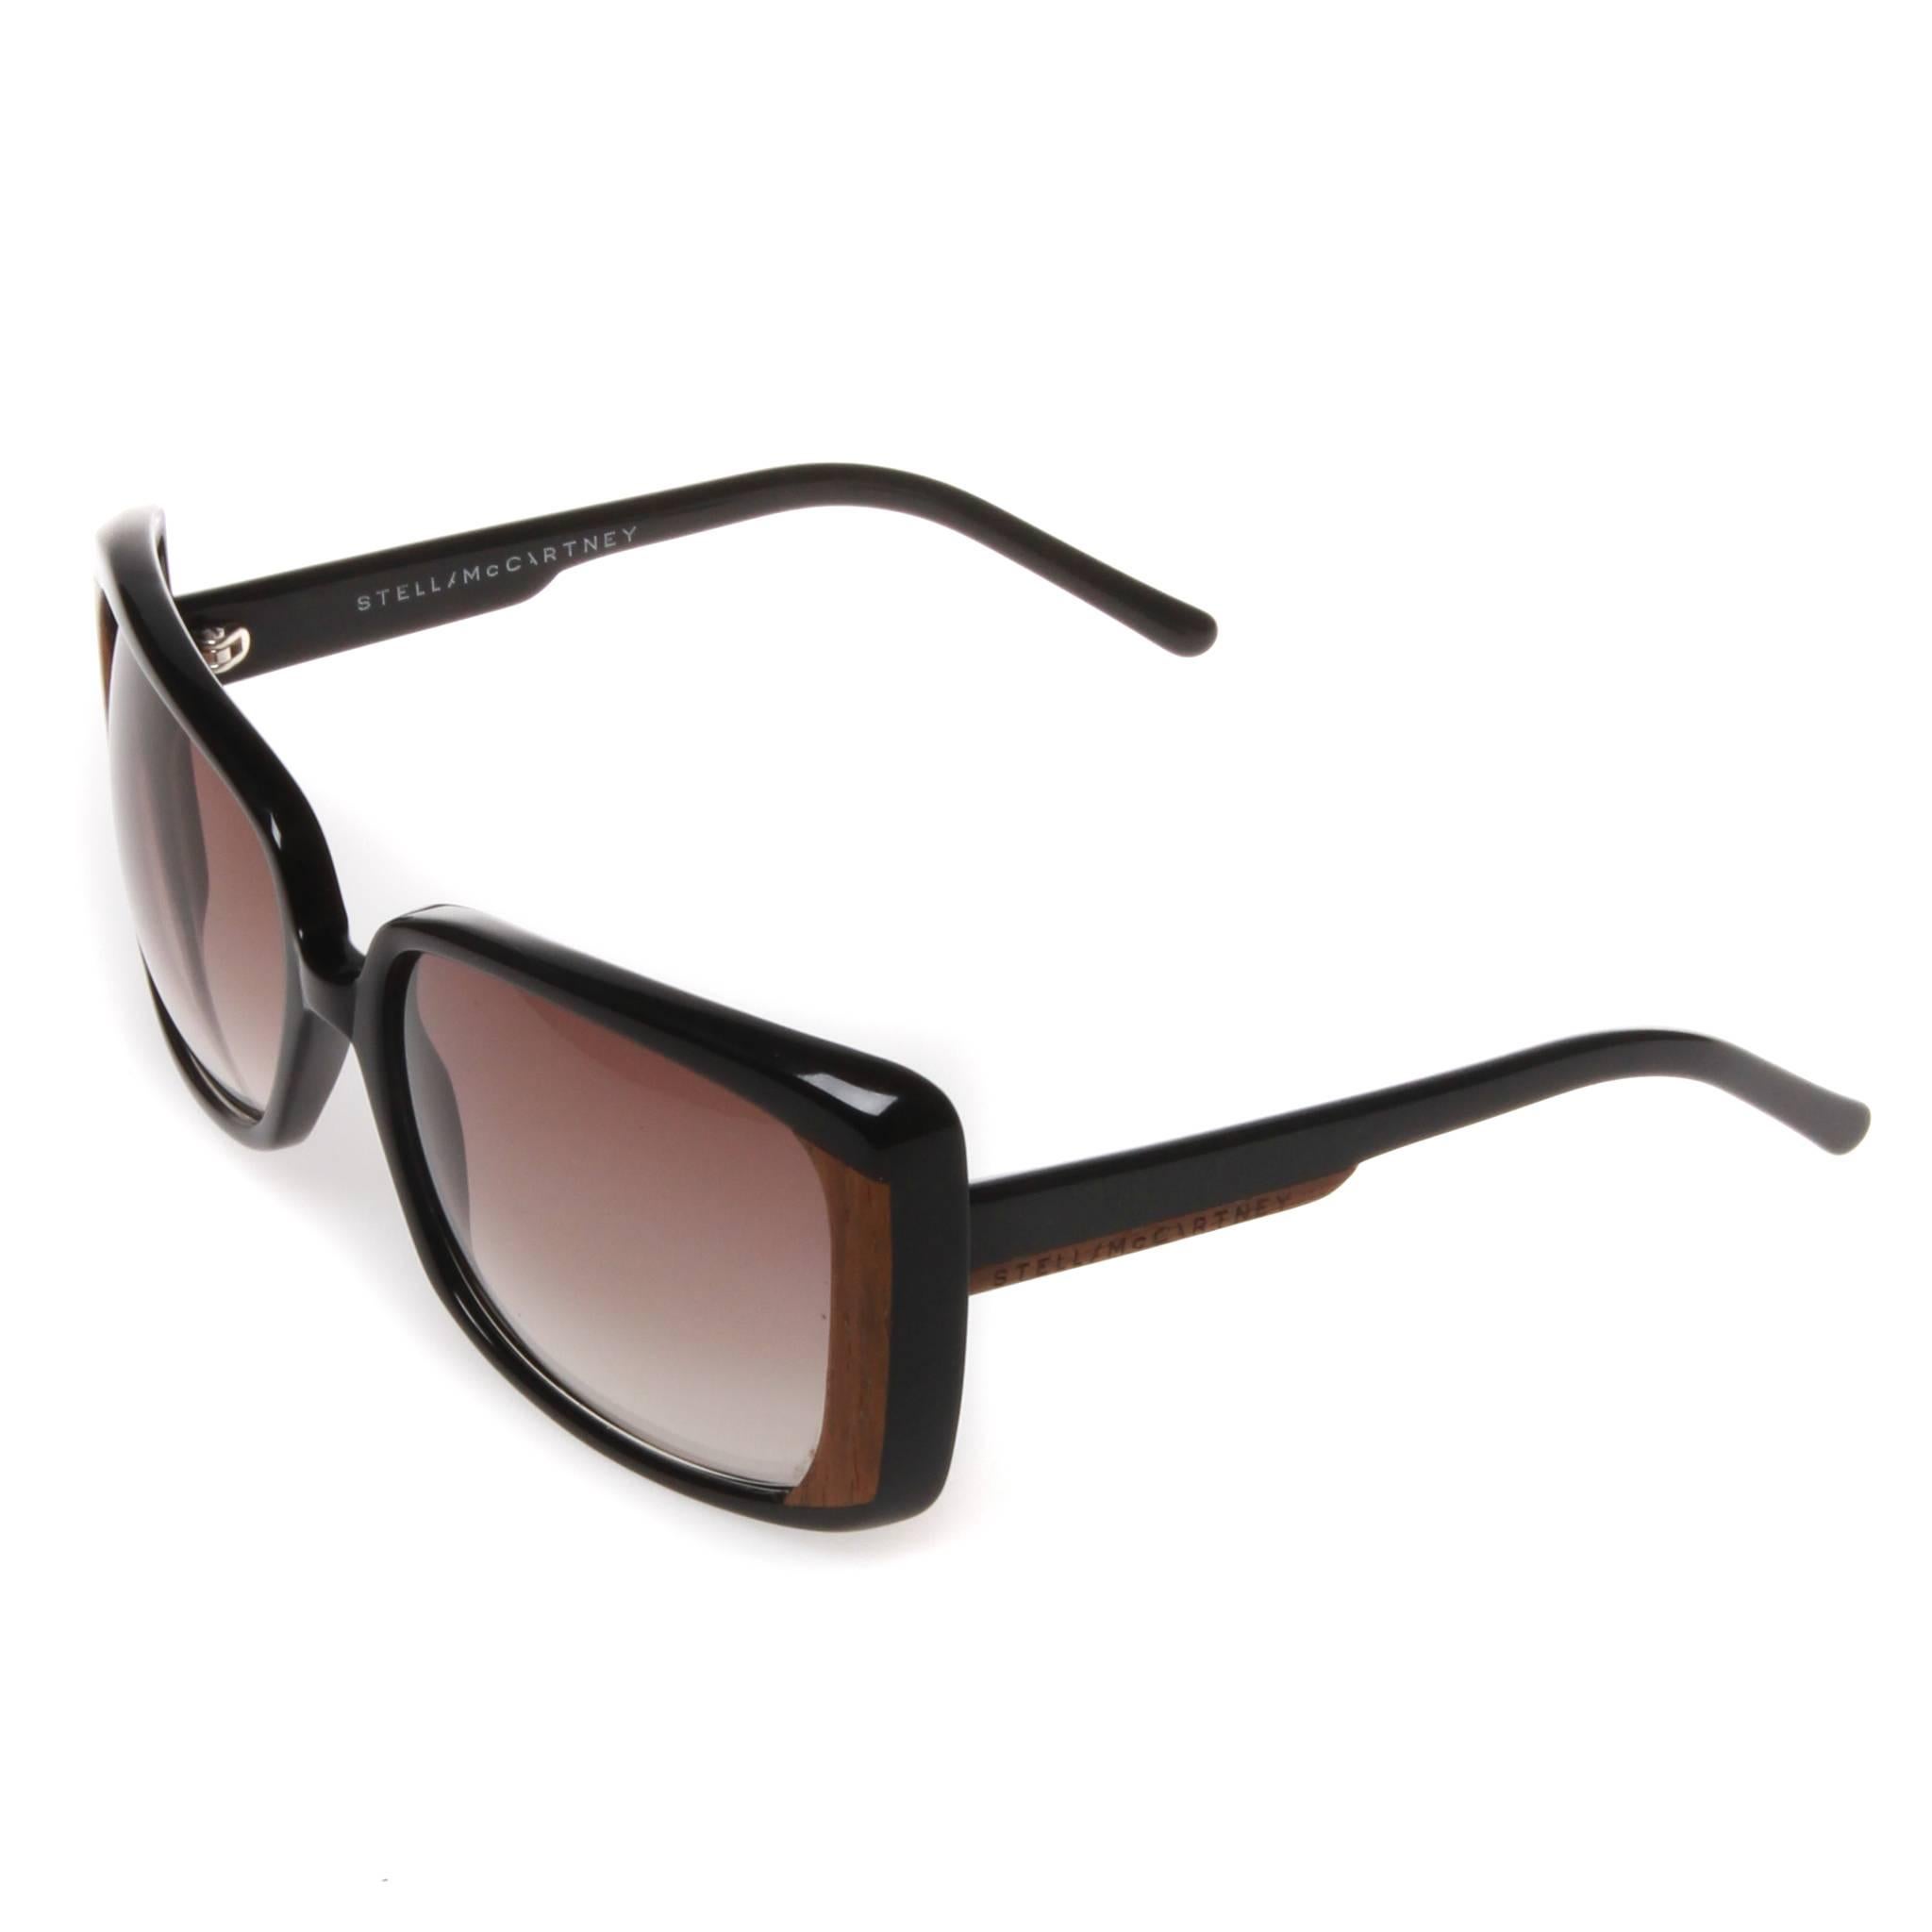 A pair of square set oversized Stella McCartney sunglasses featuring wooden detailing on the outer lens-side and engraved with the brand name on both arms. Frame is gloss black with lenses in a light gradient. Comes with authentic box.